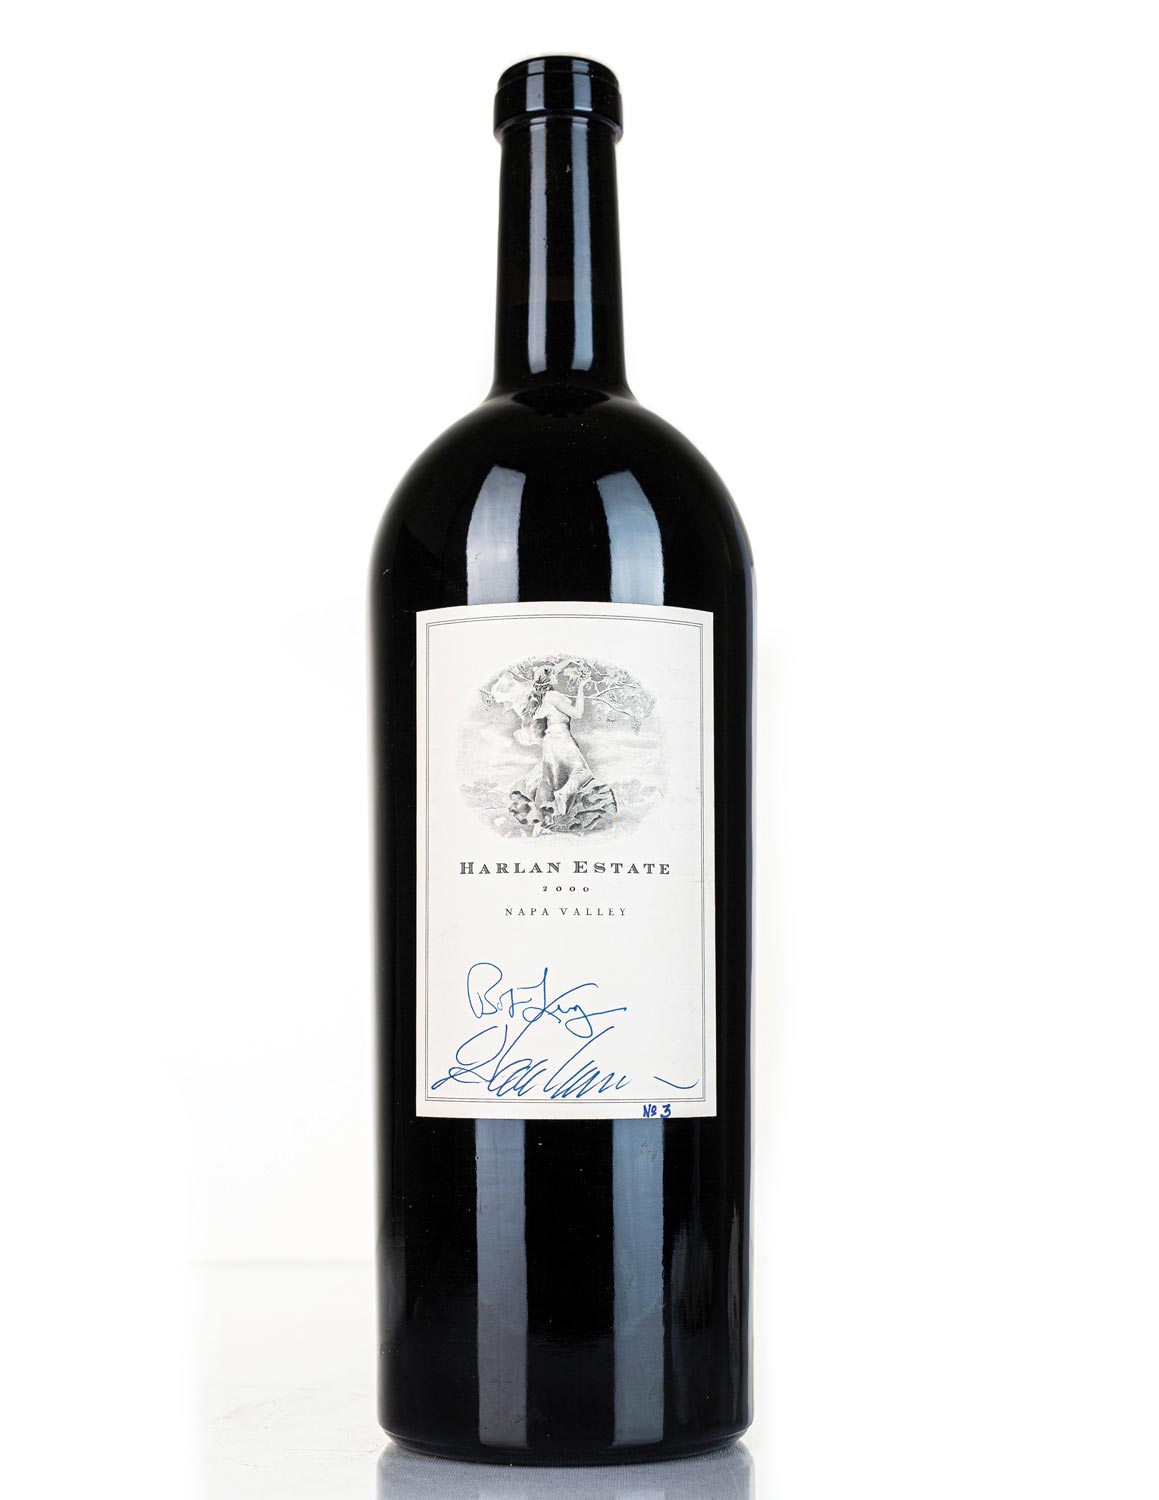 Lot 9: 1 double magnum of 2000 Harlan Estate Red